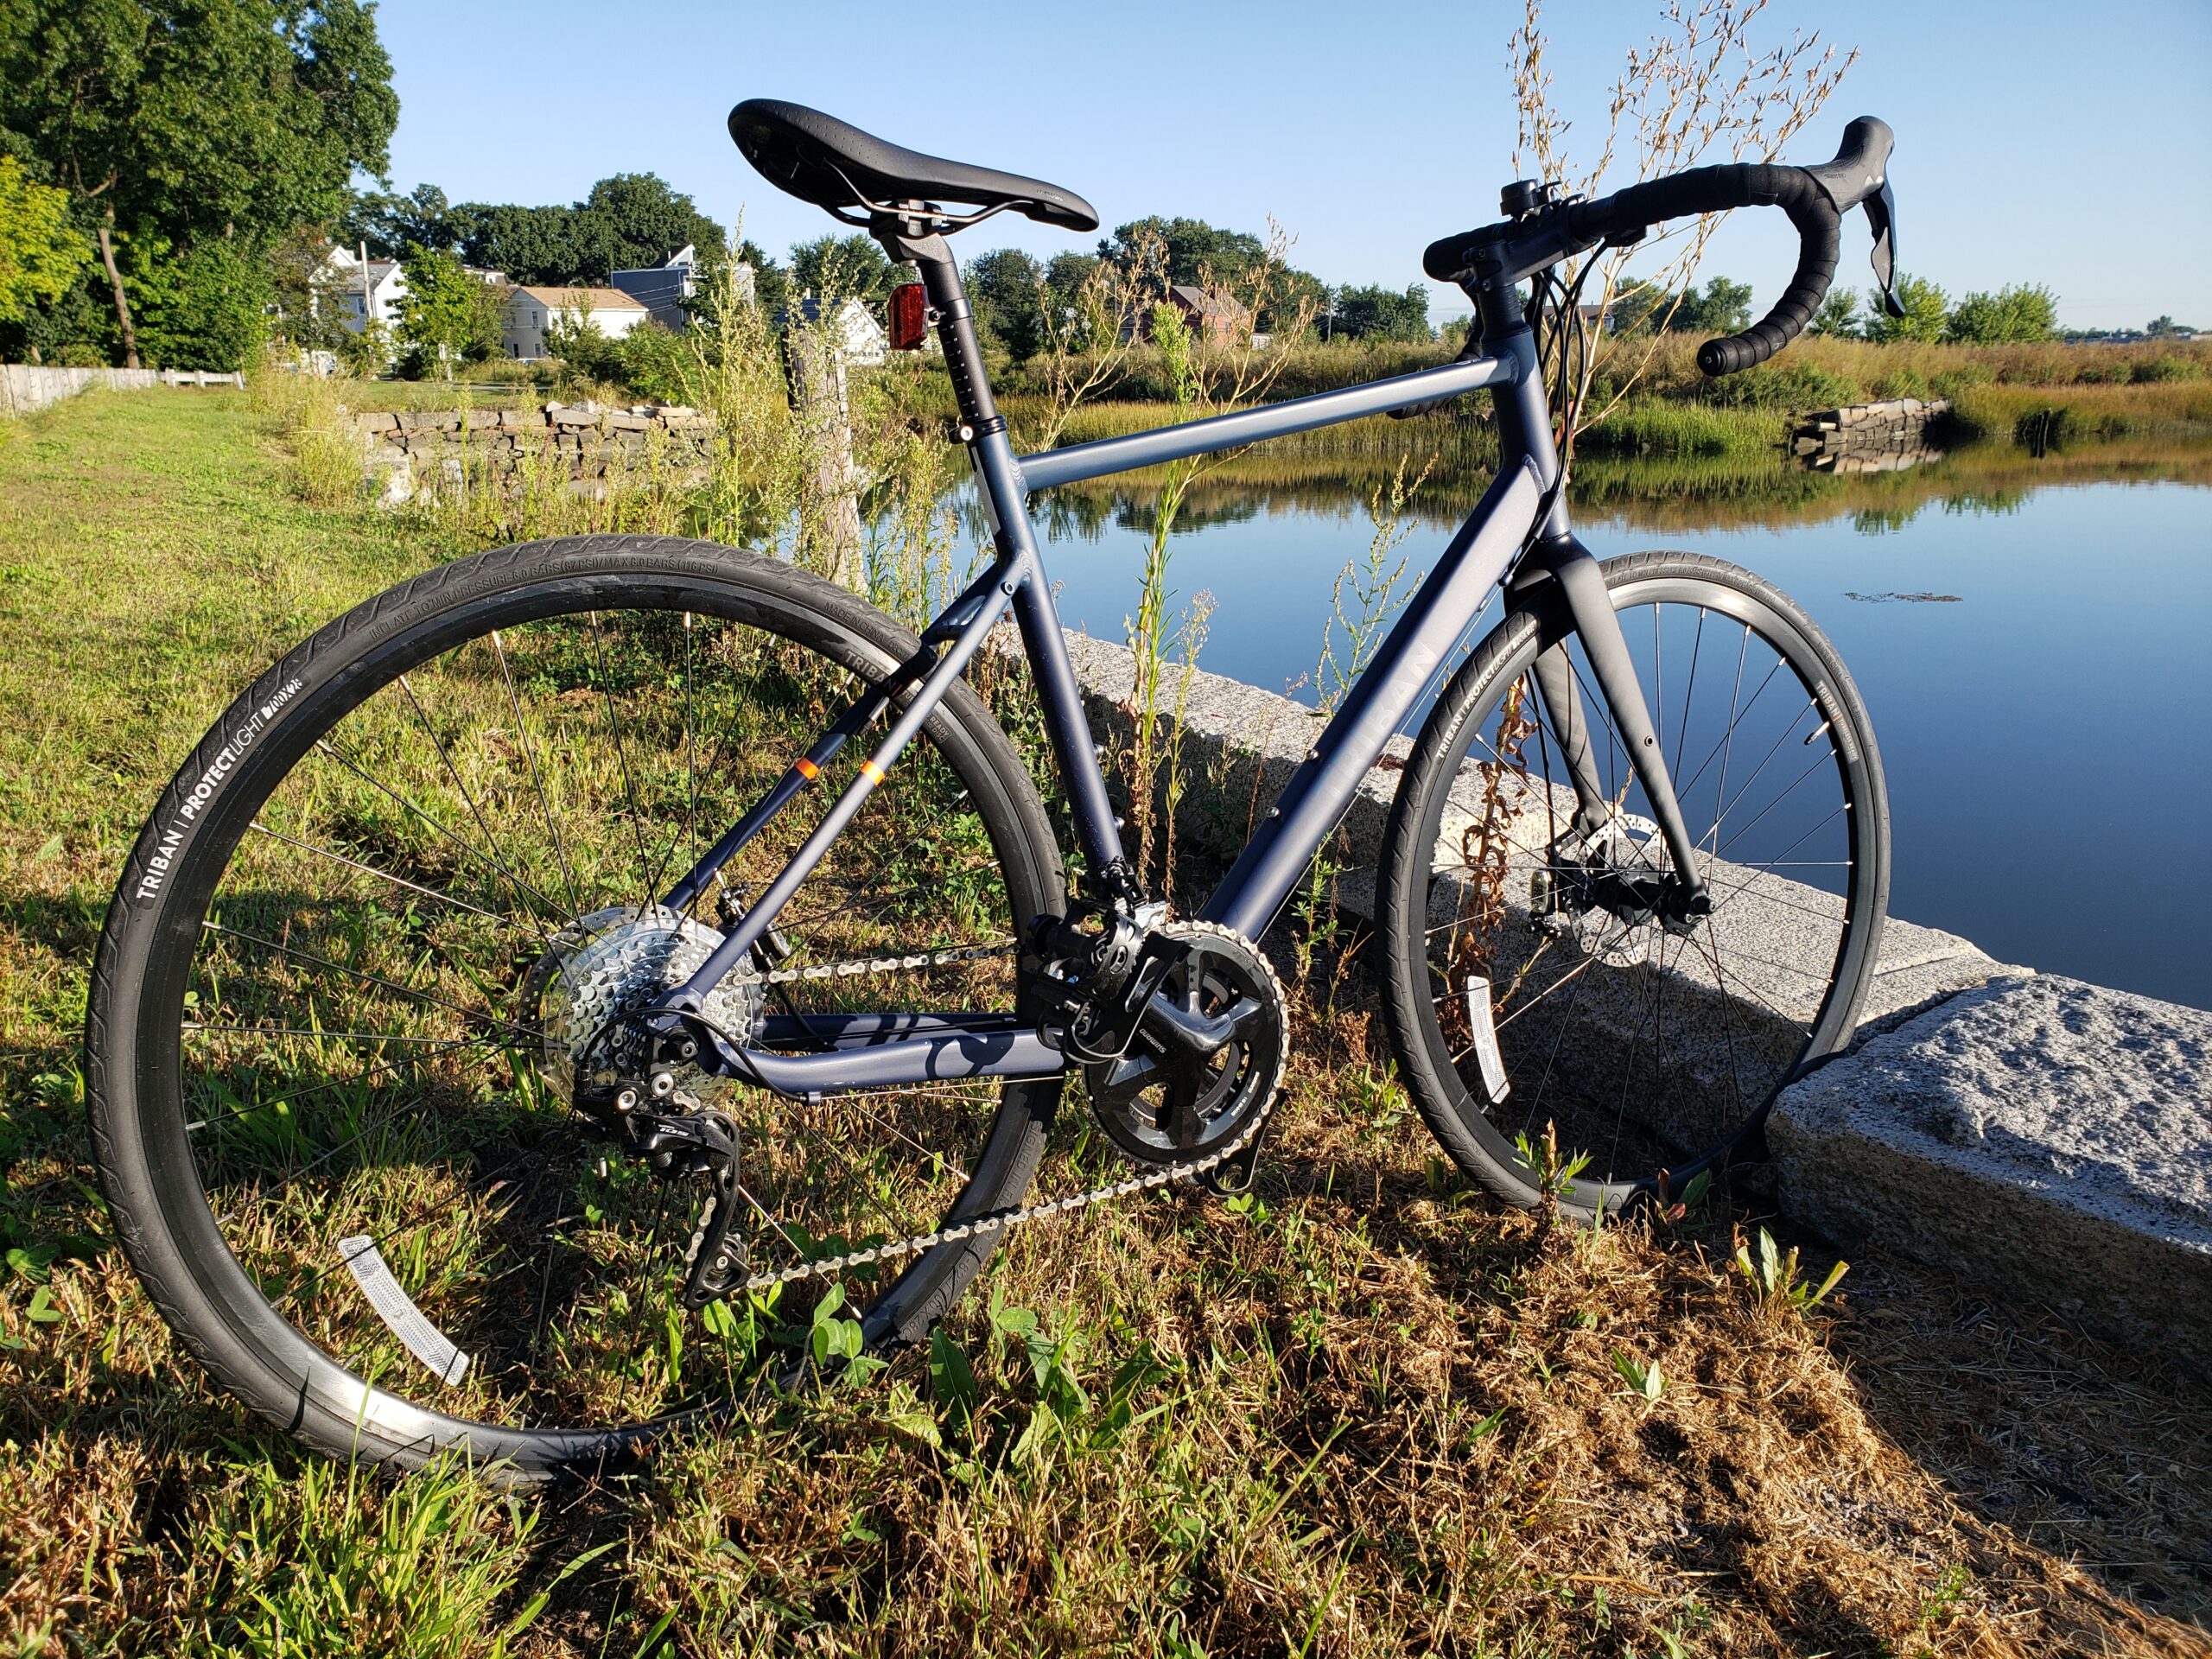 Decathalon's Triban bicycle on grass by some water